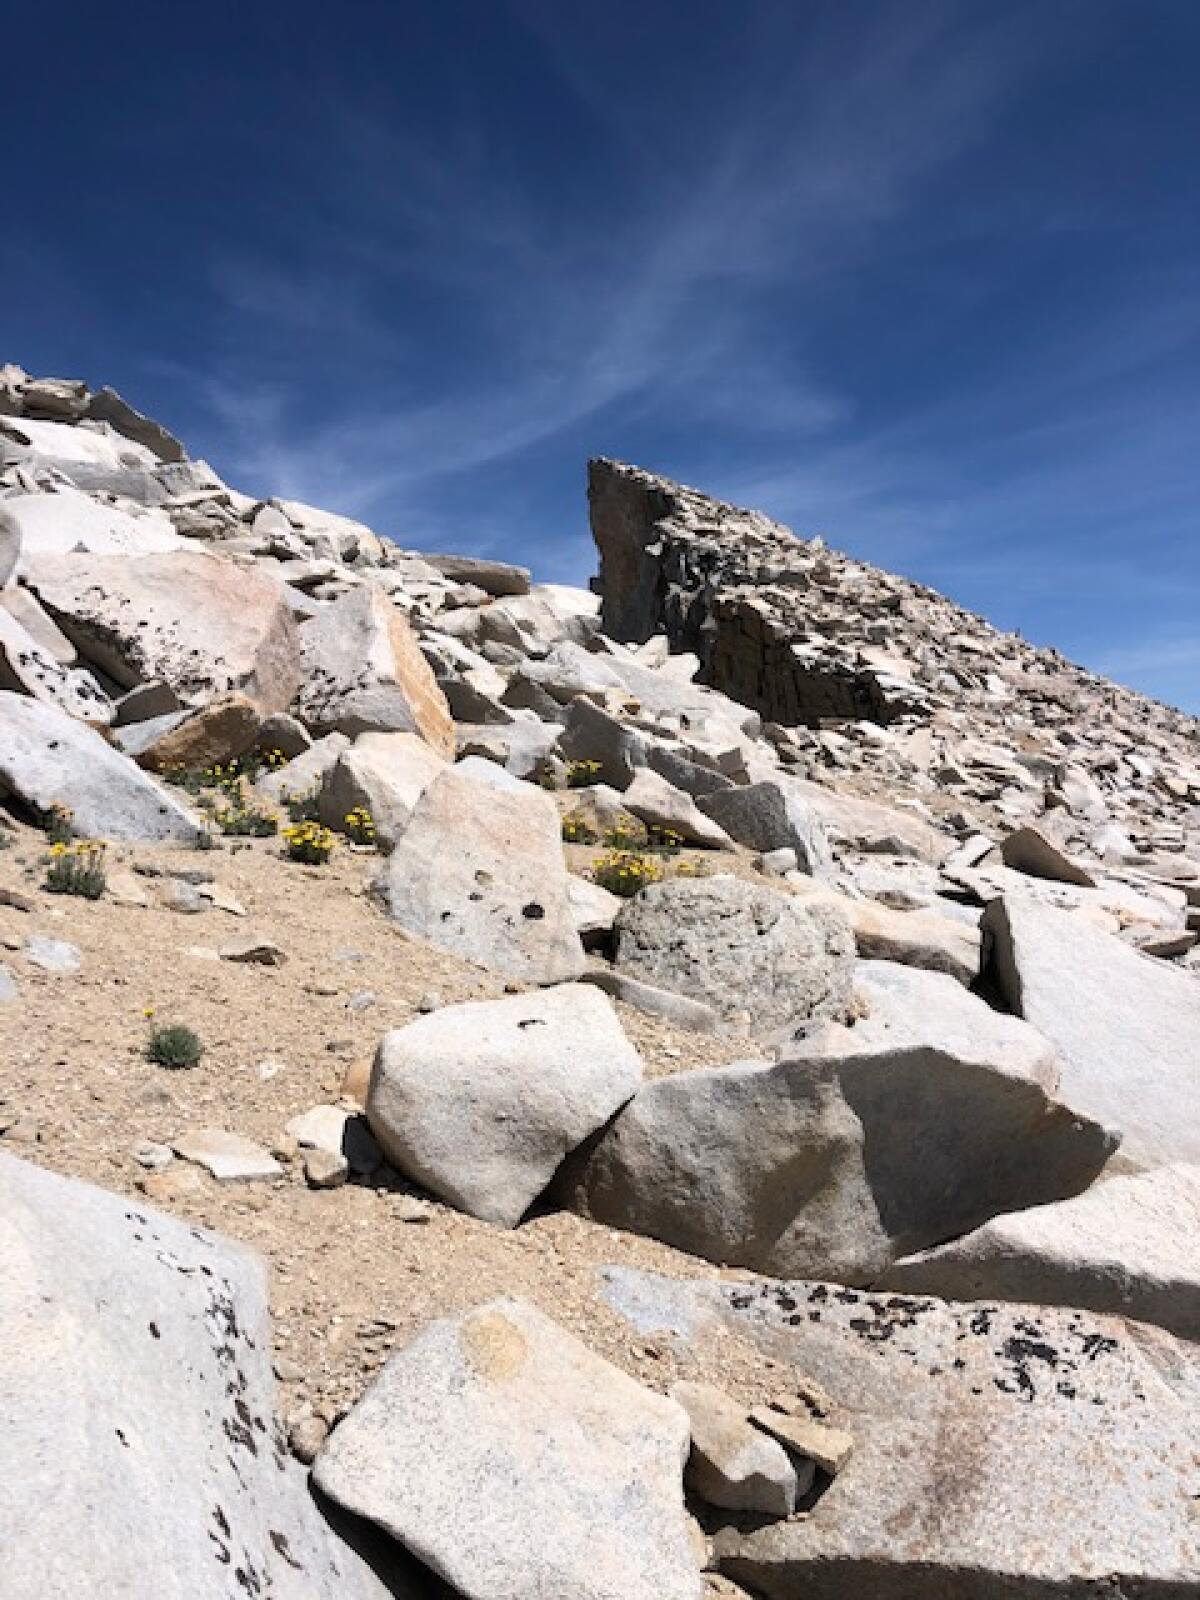 The Mt. Whitney Trail gets narrow and rocky on the way to the summit.